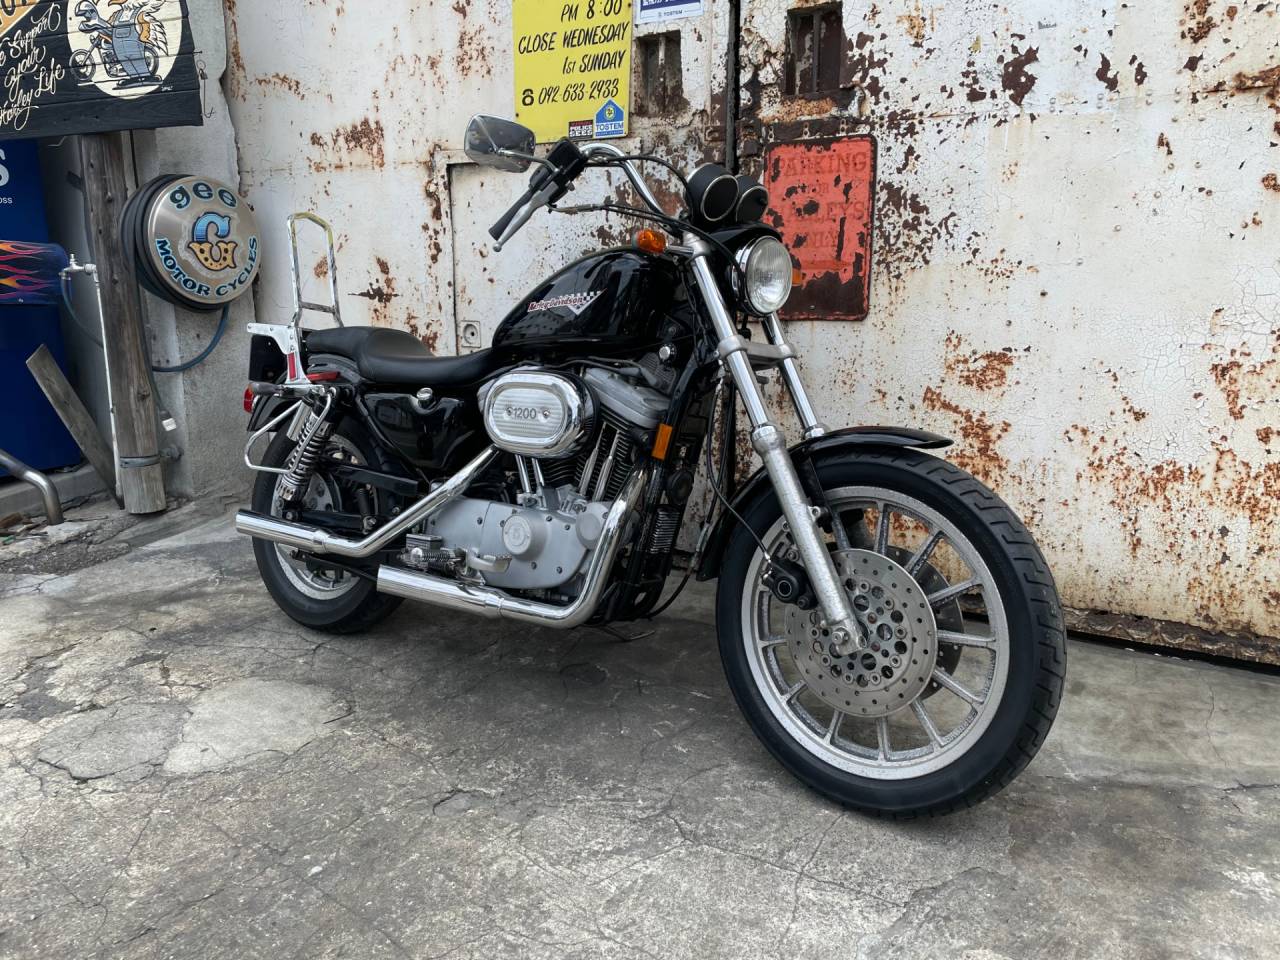 1998　XL1200S　SPORTSTER SOLDOUT